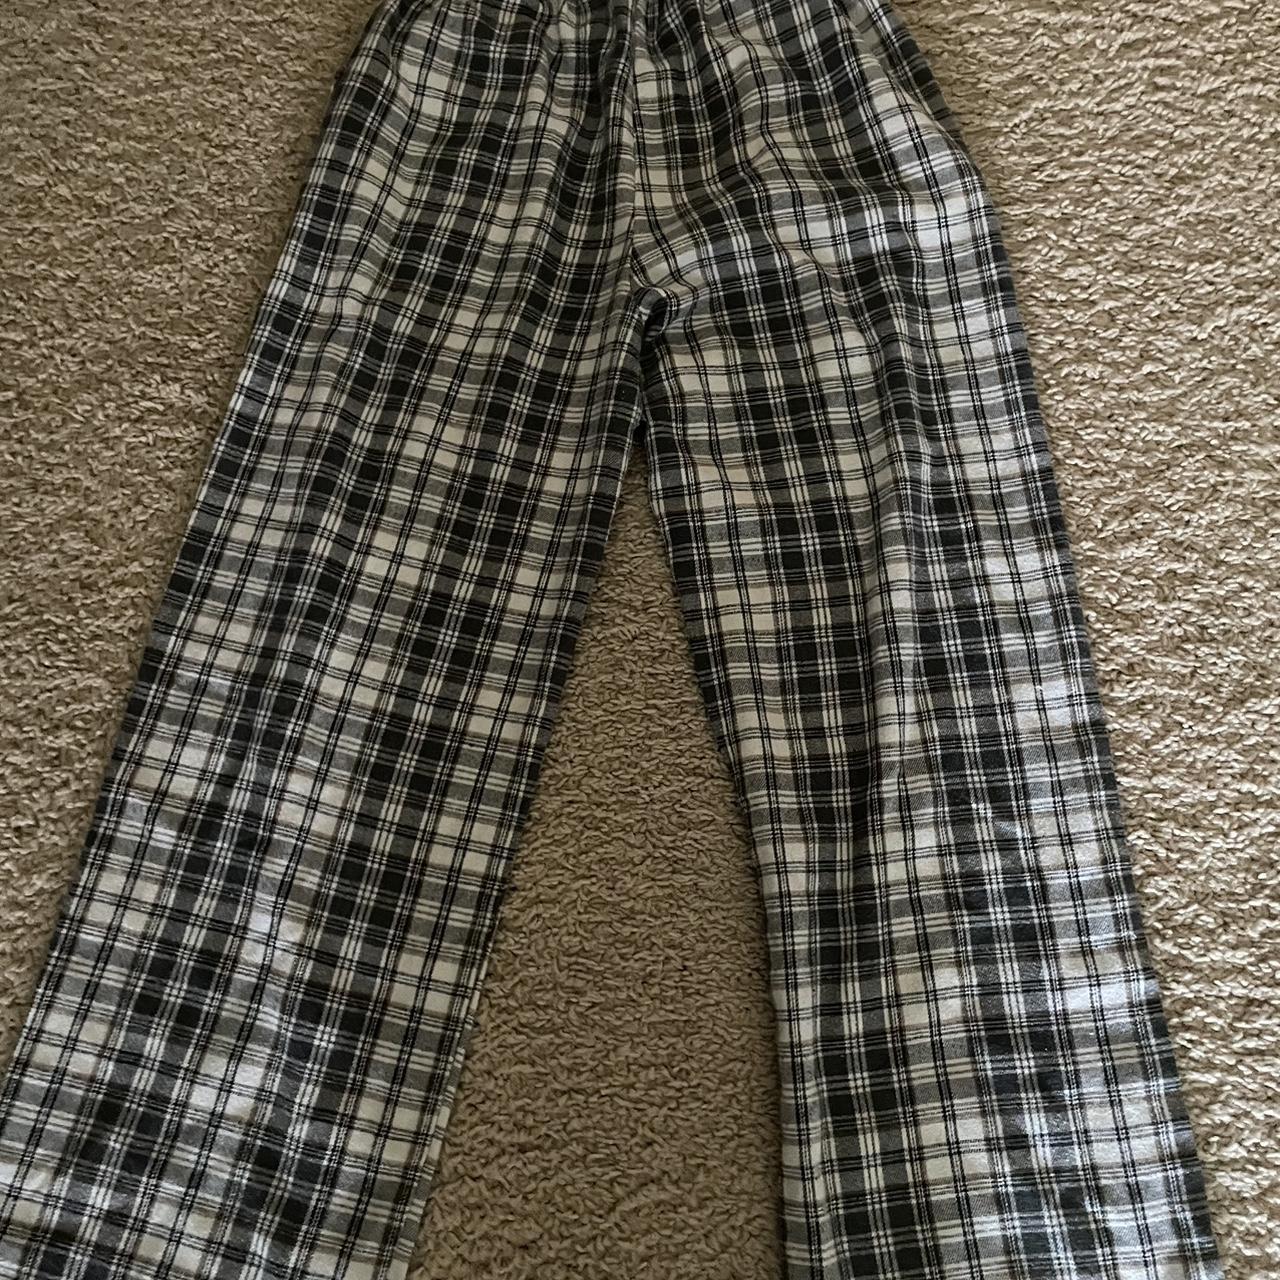 Small pj pants from SHEIN. They didn’t fit - Depop